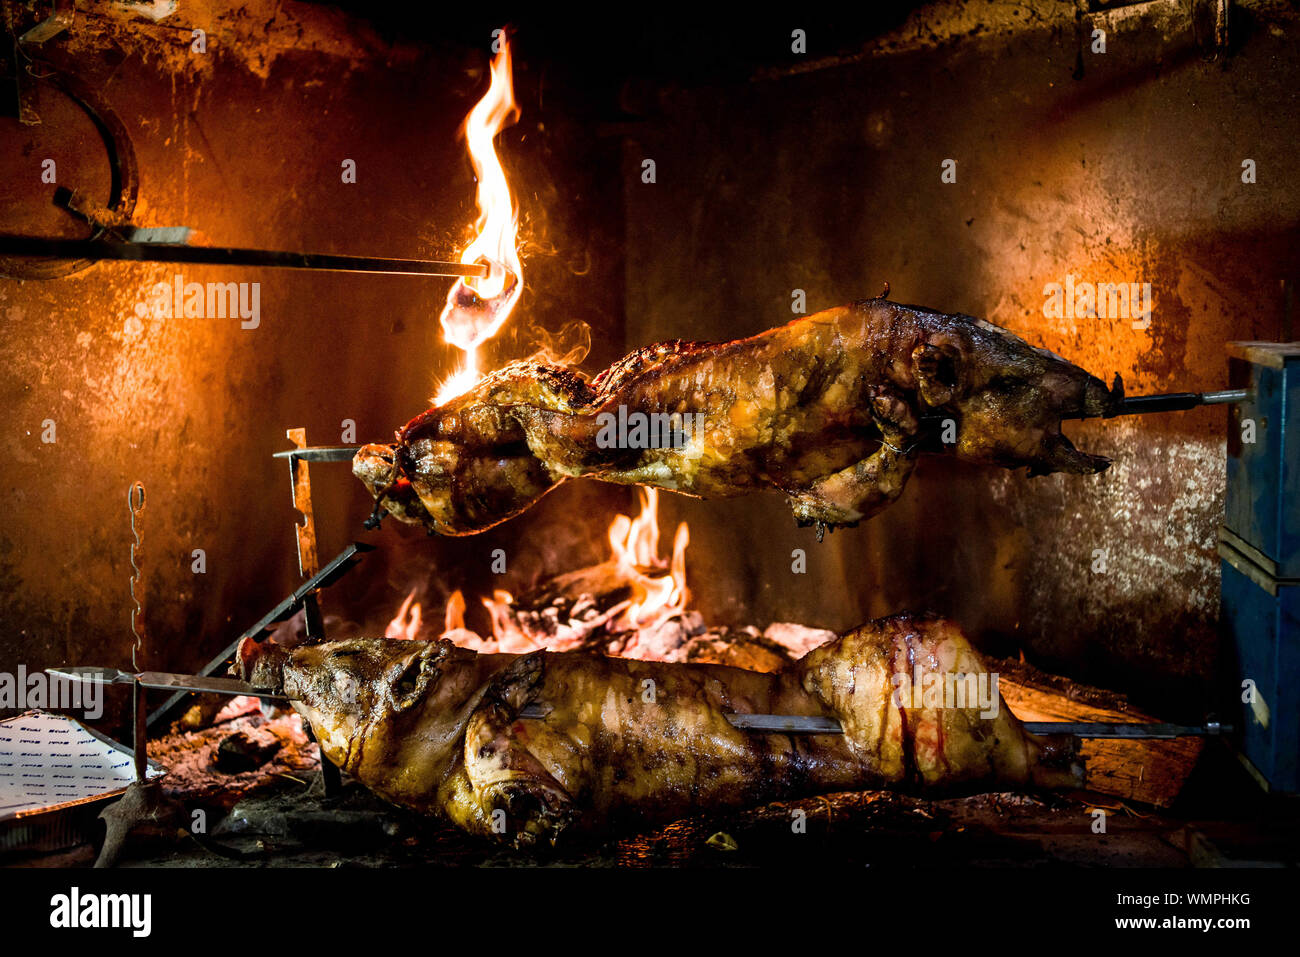 August 22, 2019, Bonnanaro, Sardinia, Italy: Grilled pigs on spit above the grill at the fireplace in Sardinia, Italy (Credit Image: © Jordi Boixareu/ZUMA Wire) Stock Photo